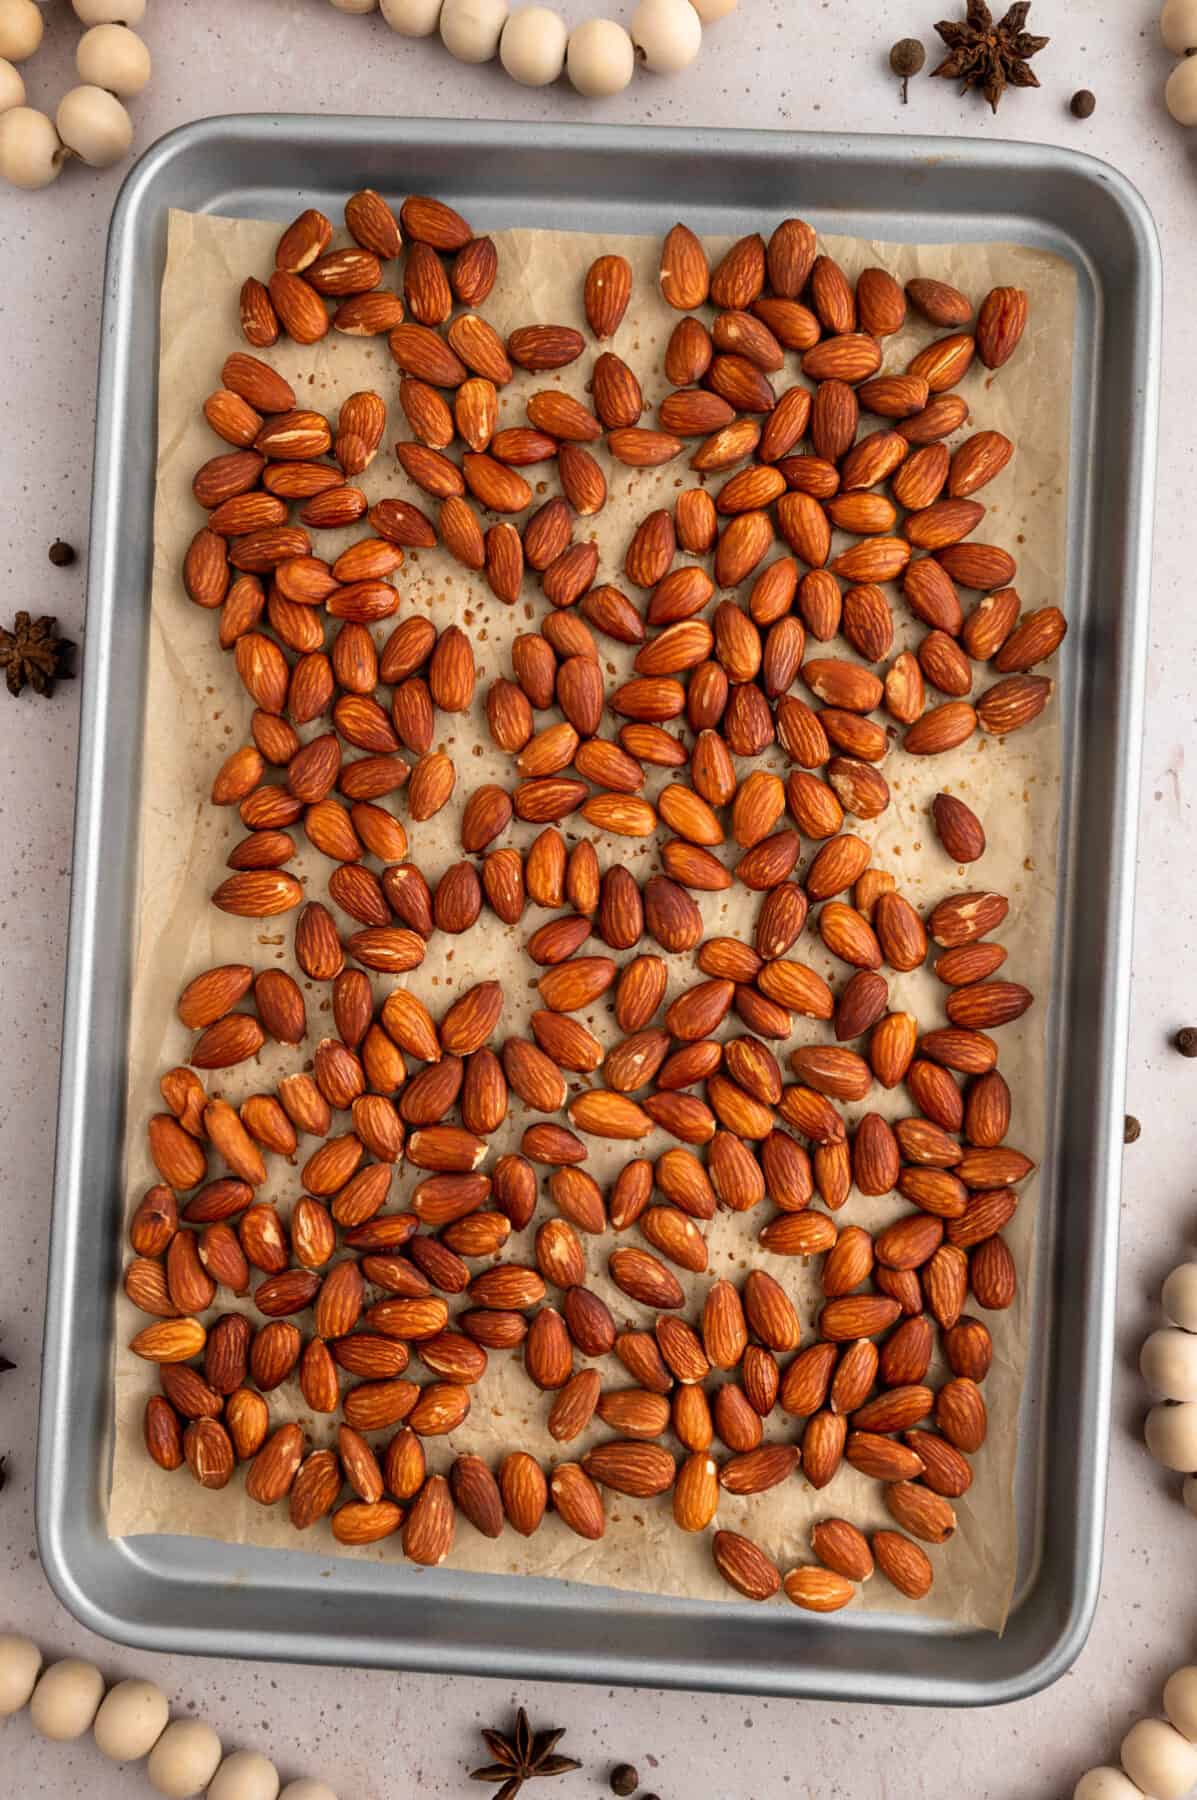 roasted almonds on the baking sheet with parchment paper.